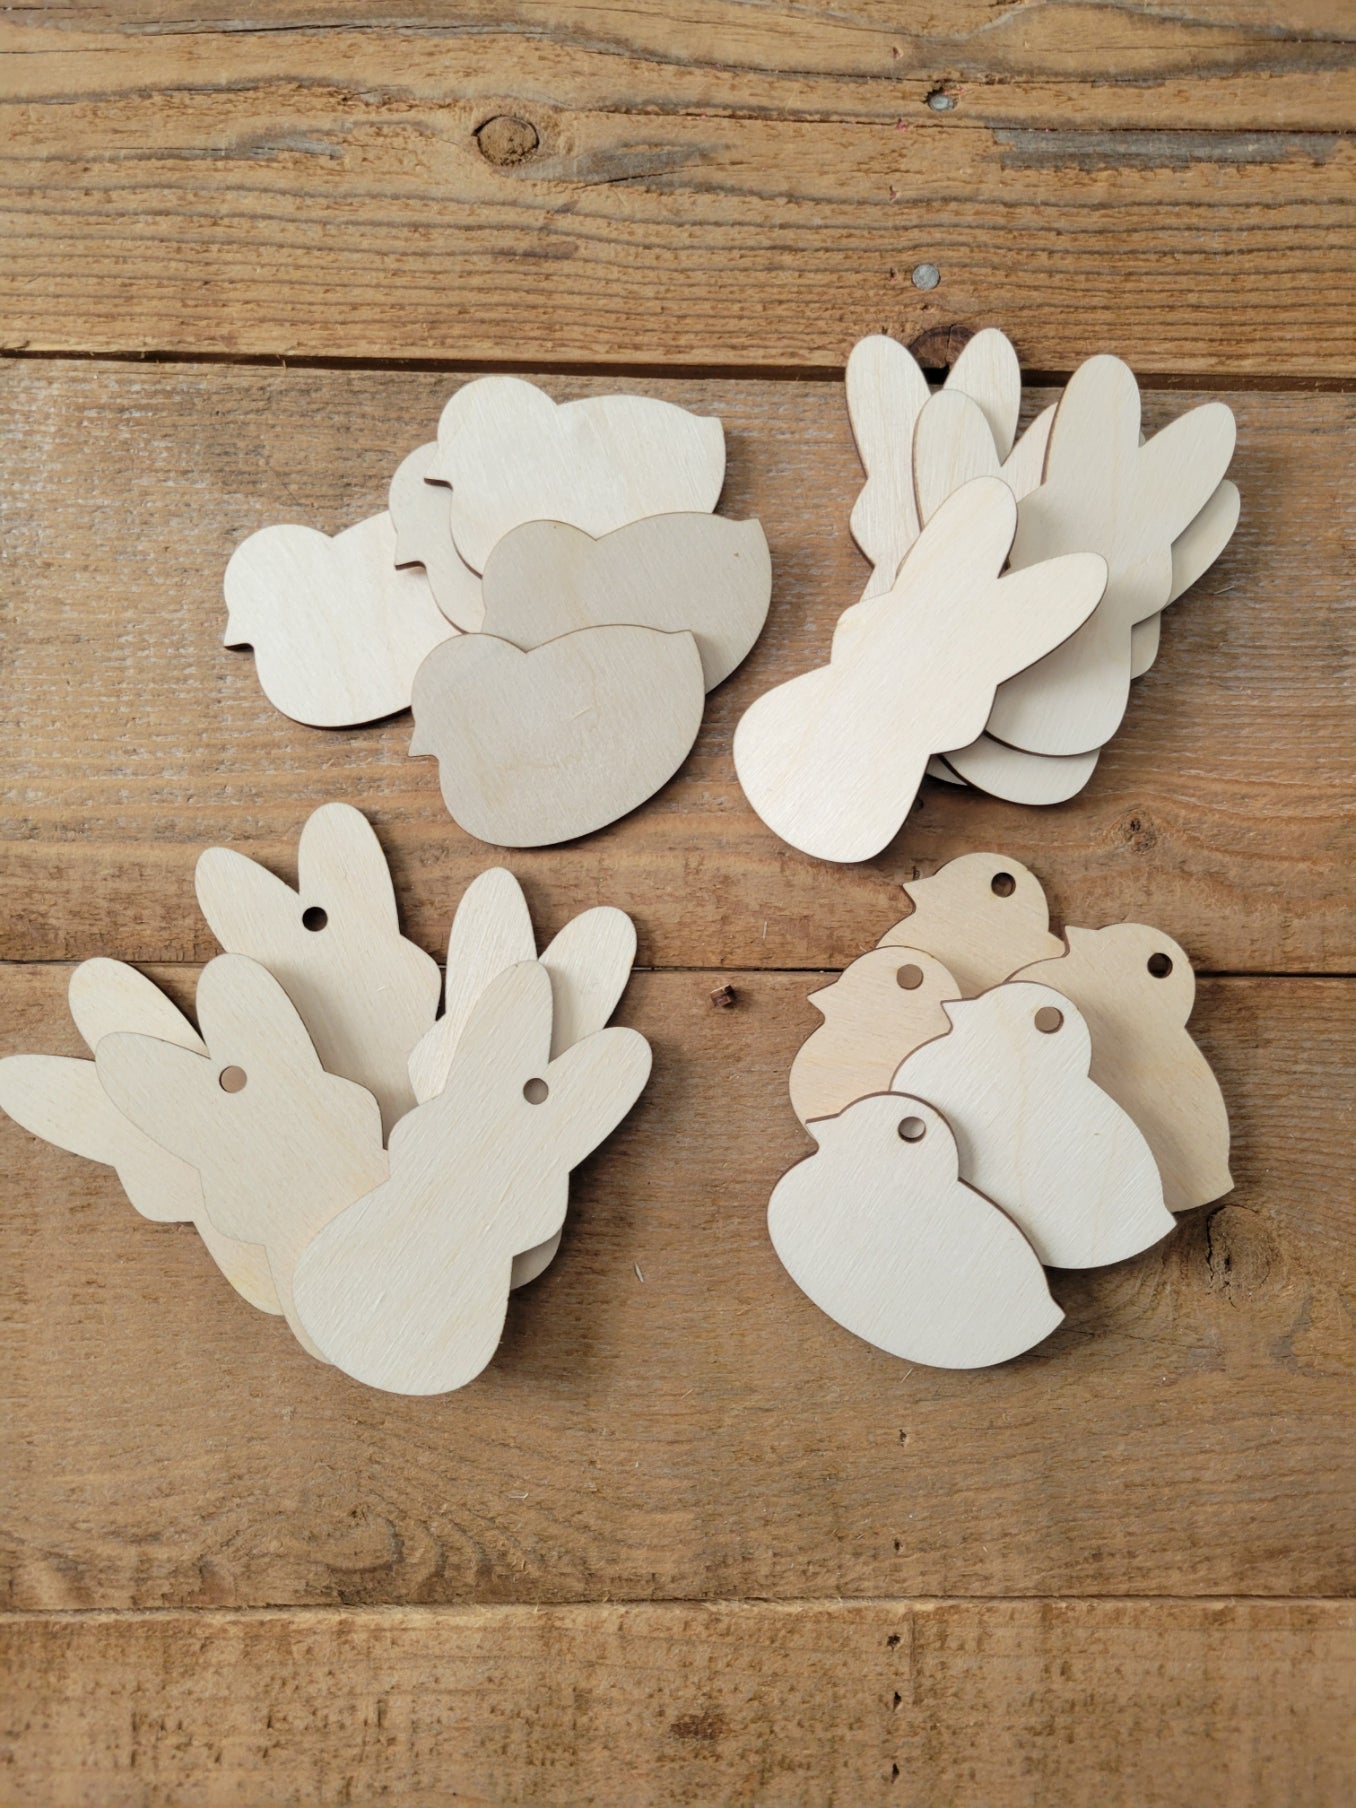 Wood Tag  Wood Blanks  Shape Blanks  Peeps  Laser DIY  Farmhouse  Easter  Door Tags  Door Tag  Crafty Gifts  Chicks  Chalk Couture  Blank Shapes